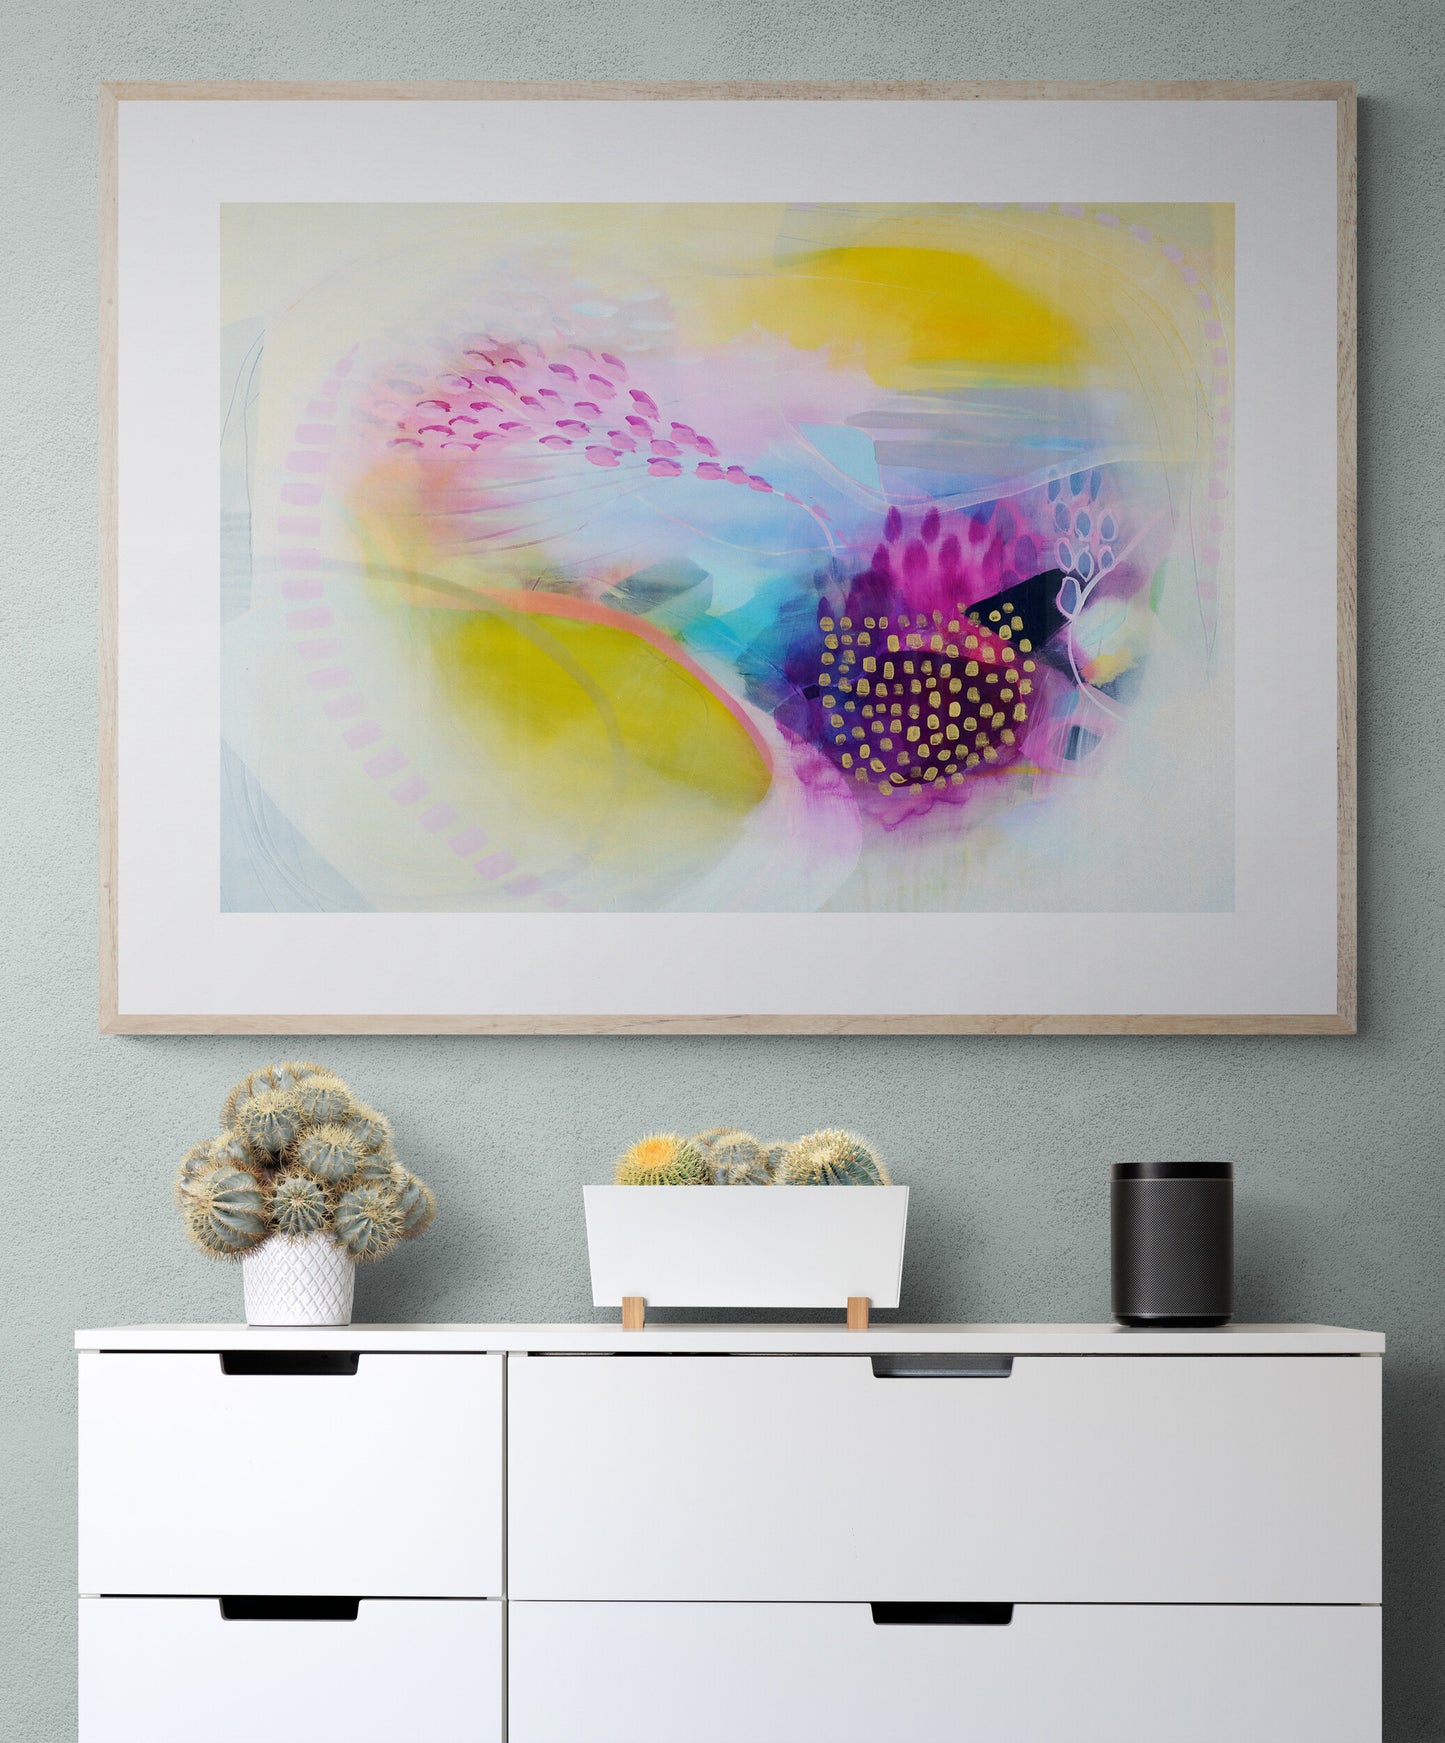 Expressive Abstract Wall Art Print in shades of Yellow, Pink and Blue